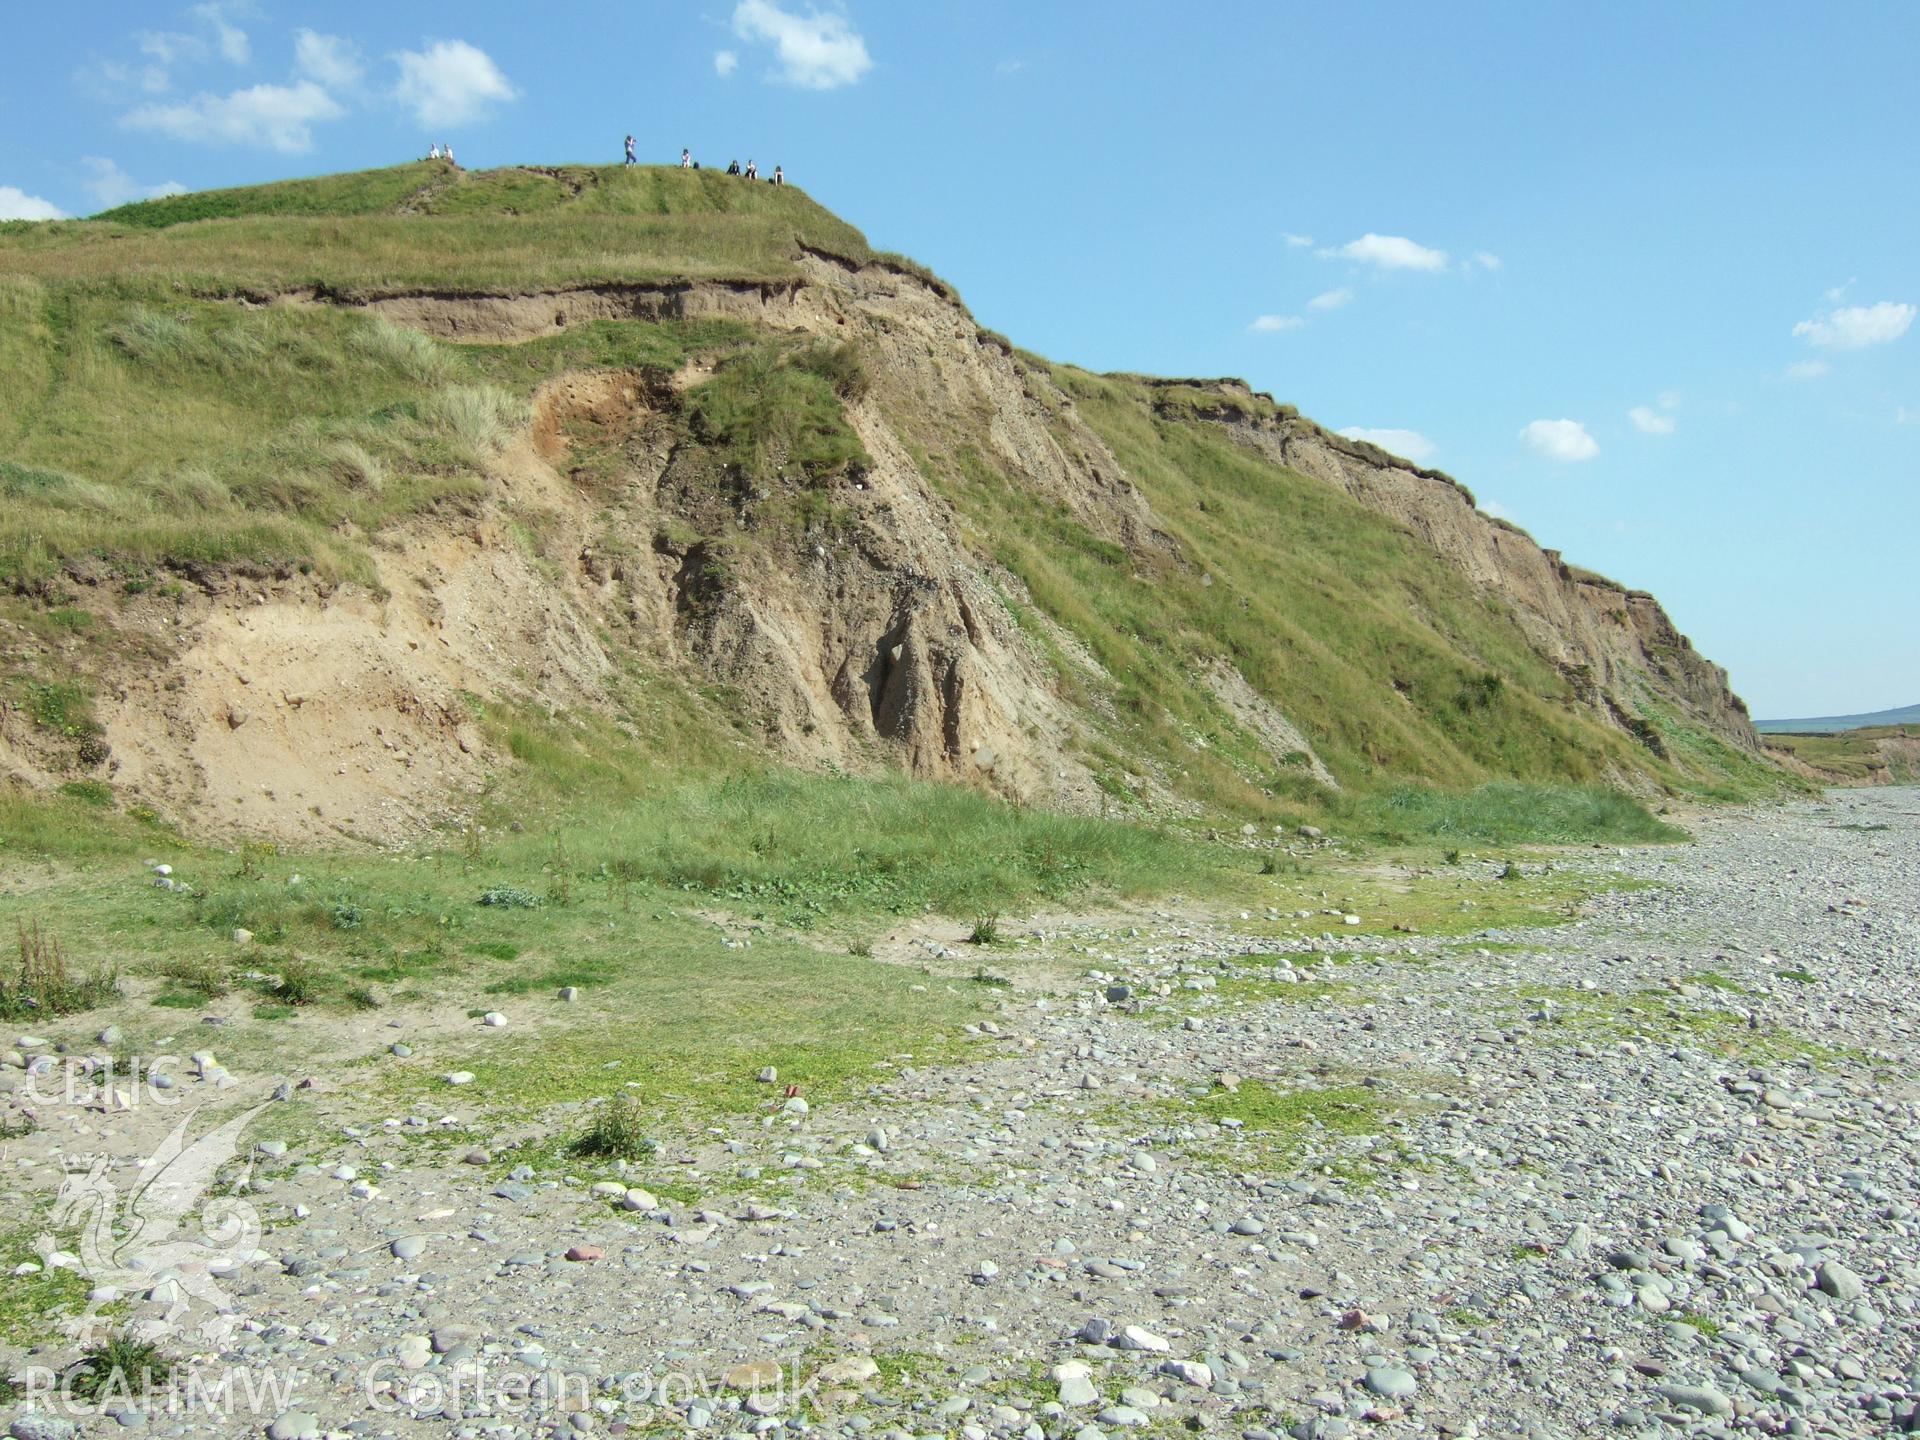 Coastal erosion of the west side viewed from the northwest.